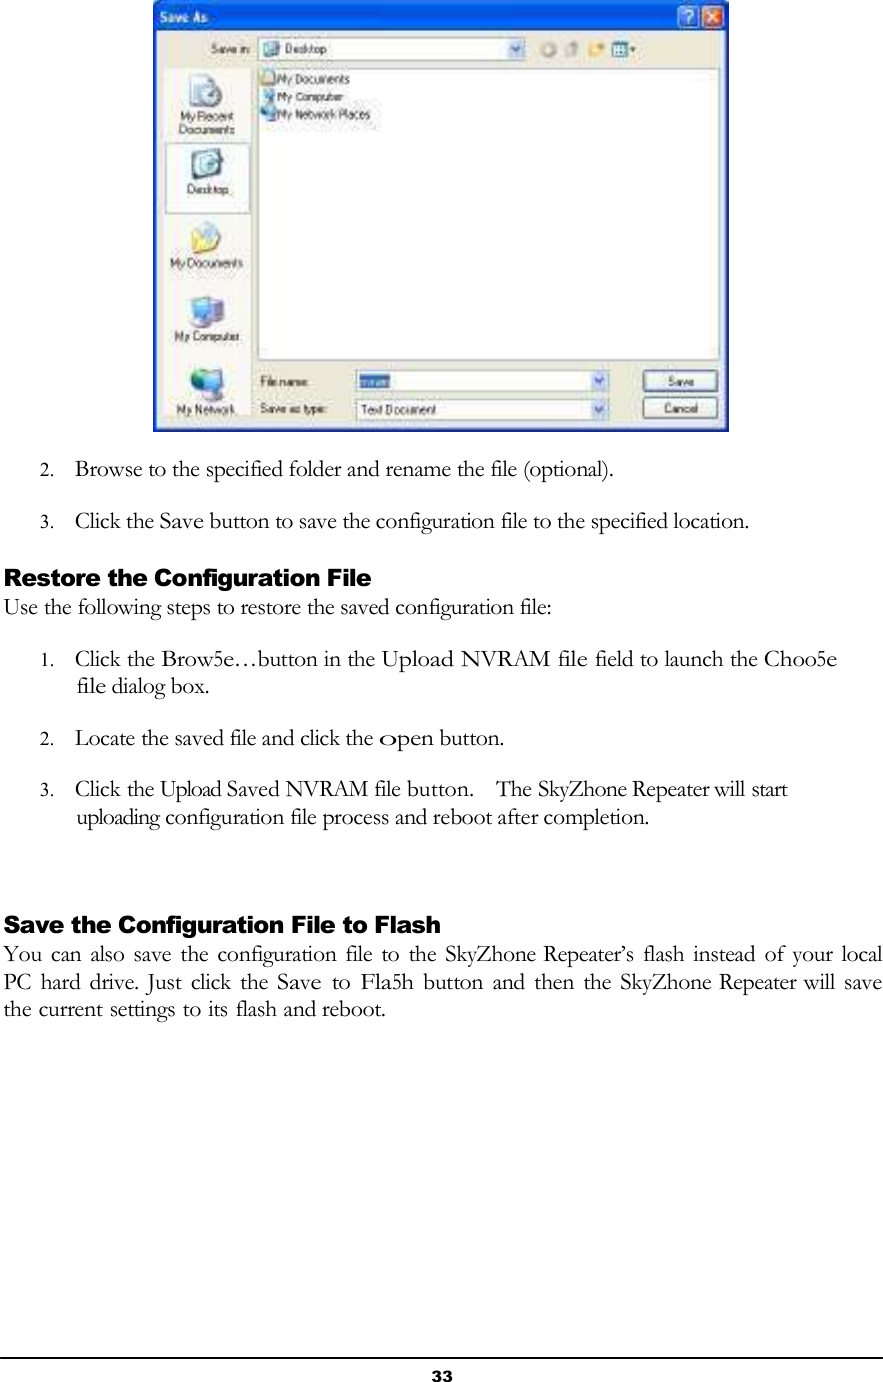 33         2. Browse to the specified folder and rename the file (optional).  3. Click the Save button to save the configuration file to the specified location.  Restore the Configuration File Use the following steps to restore the saved configuration file:  1. Click the Brow5e…button in the Upload NVRAM file field to launch the Choo5e file dialog box.  2. Locate the saved file and click the open button.  3. Click the Upload Saved NVRAM file button.    The SkyZhone Repeater will start uploading configuration file process and reboot after completion.     Save the Configuration File to Flash You can also save the configuration file to  the SkyZhone Repeater’s flash instead of your local PC  hard drive. Just click the Save to Fla5h button  and  then the  SkyZhone Repeater will save the current settings to its flash and reboot. 